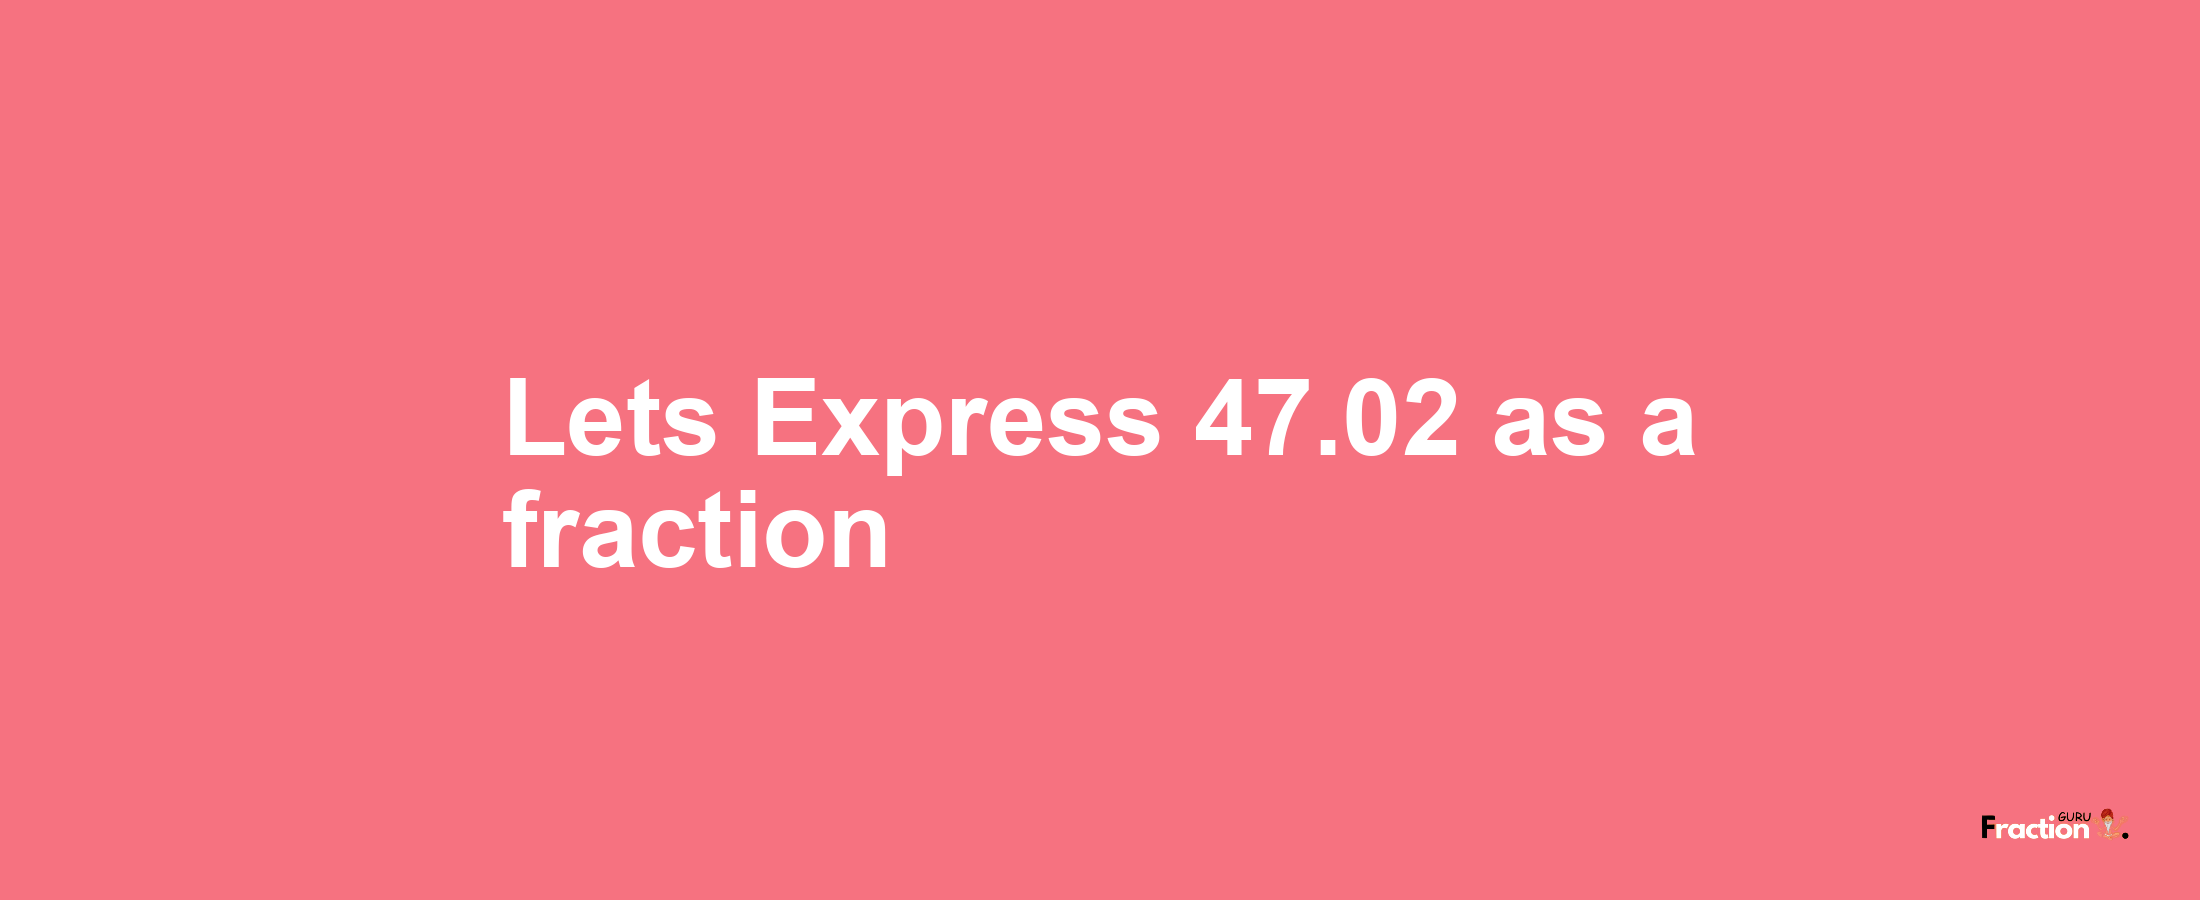 Lets Express 47.02 as afraction